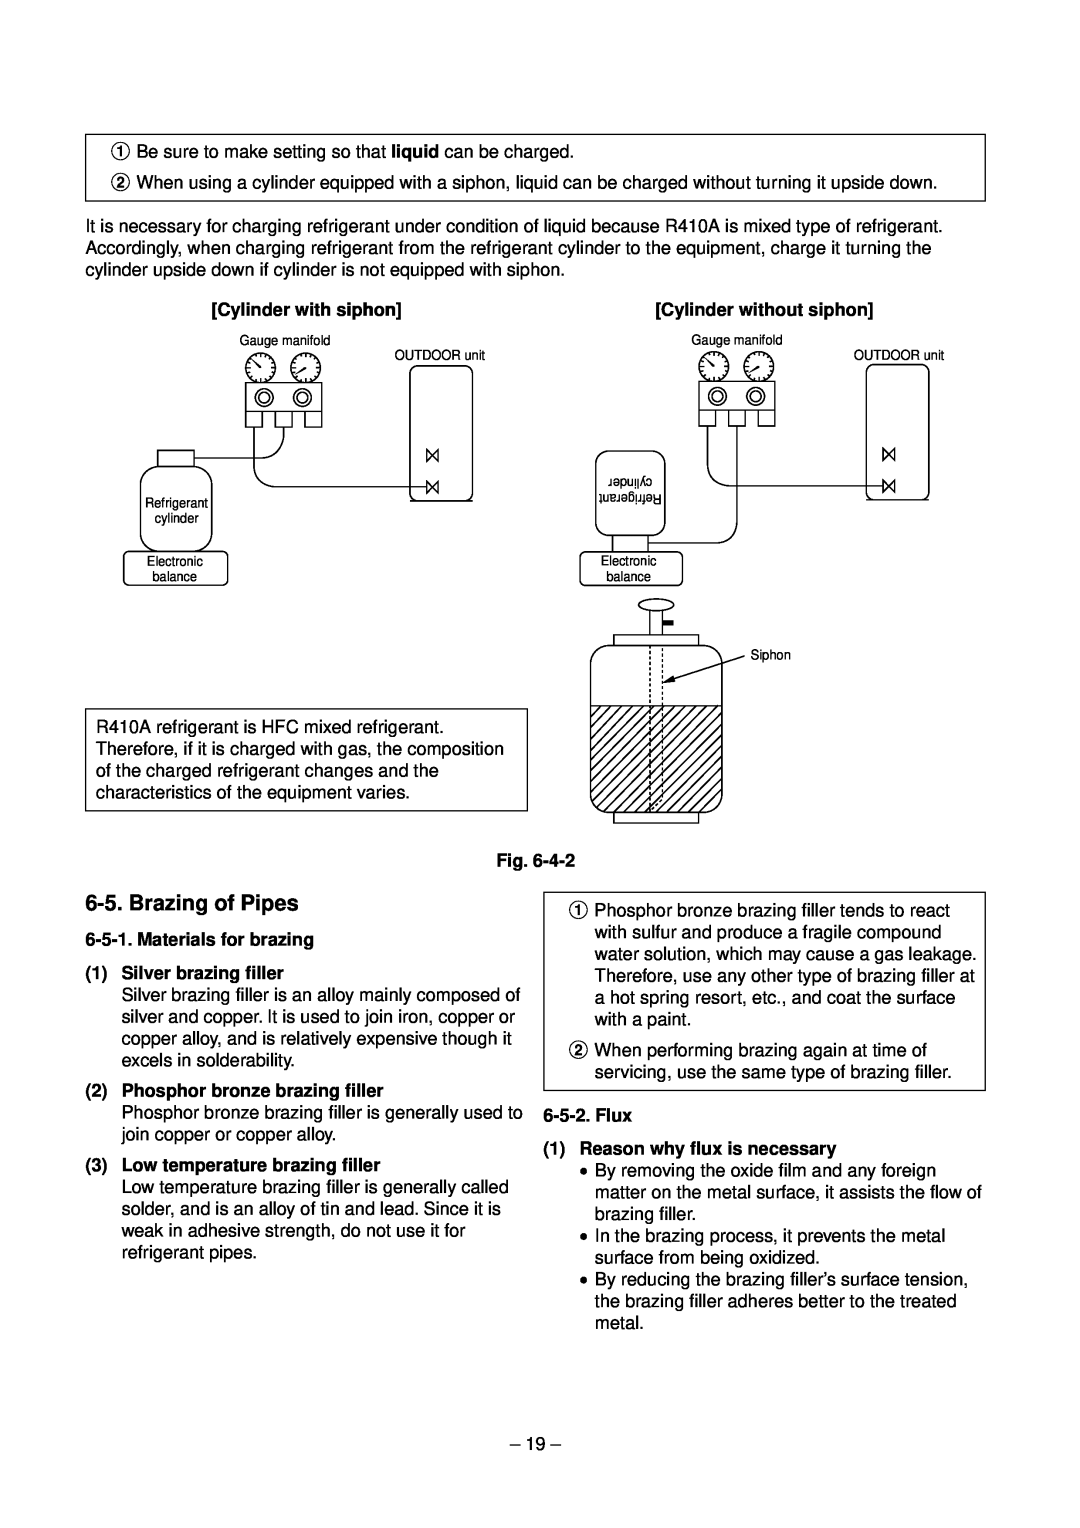 Toshiba RAV-SM560XT-E service manual Brazing of Pipes, Cylinder with siphon, Cylinder without siphon, Materials for brazing 